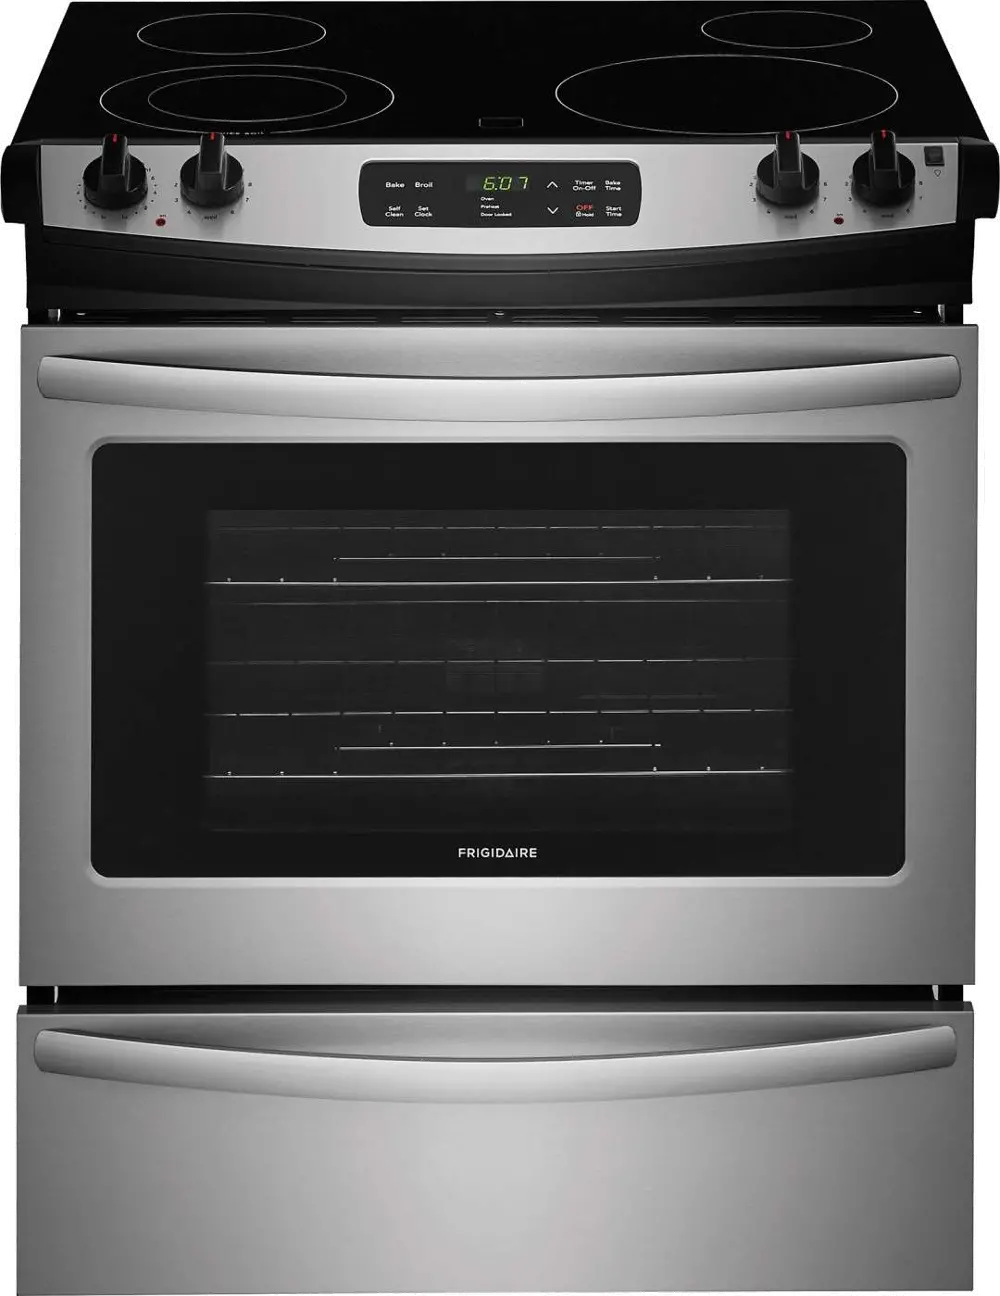 FFES3026TS Frigidaire Electric Range - 4.6 cu. ft. Stainless Steel -1